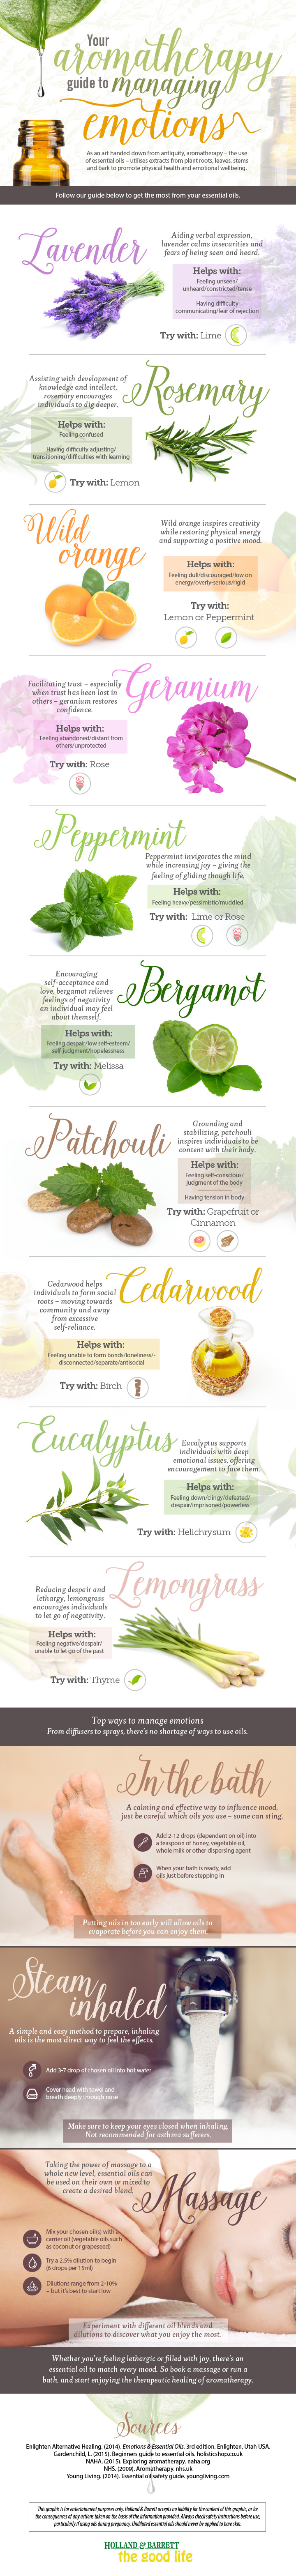 A Guide To Healing Negative Emotions With Essential Oils Infographic